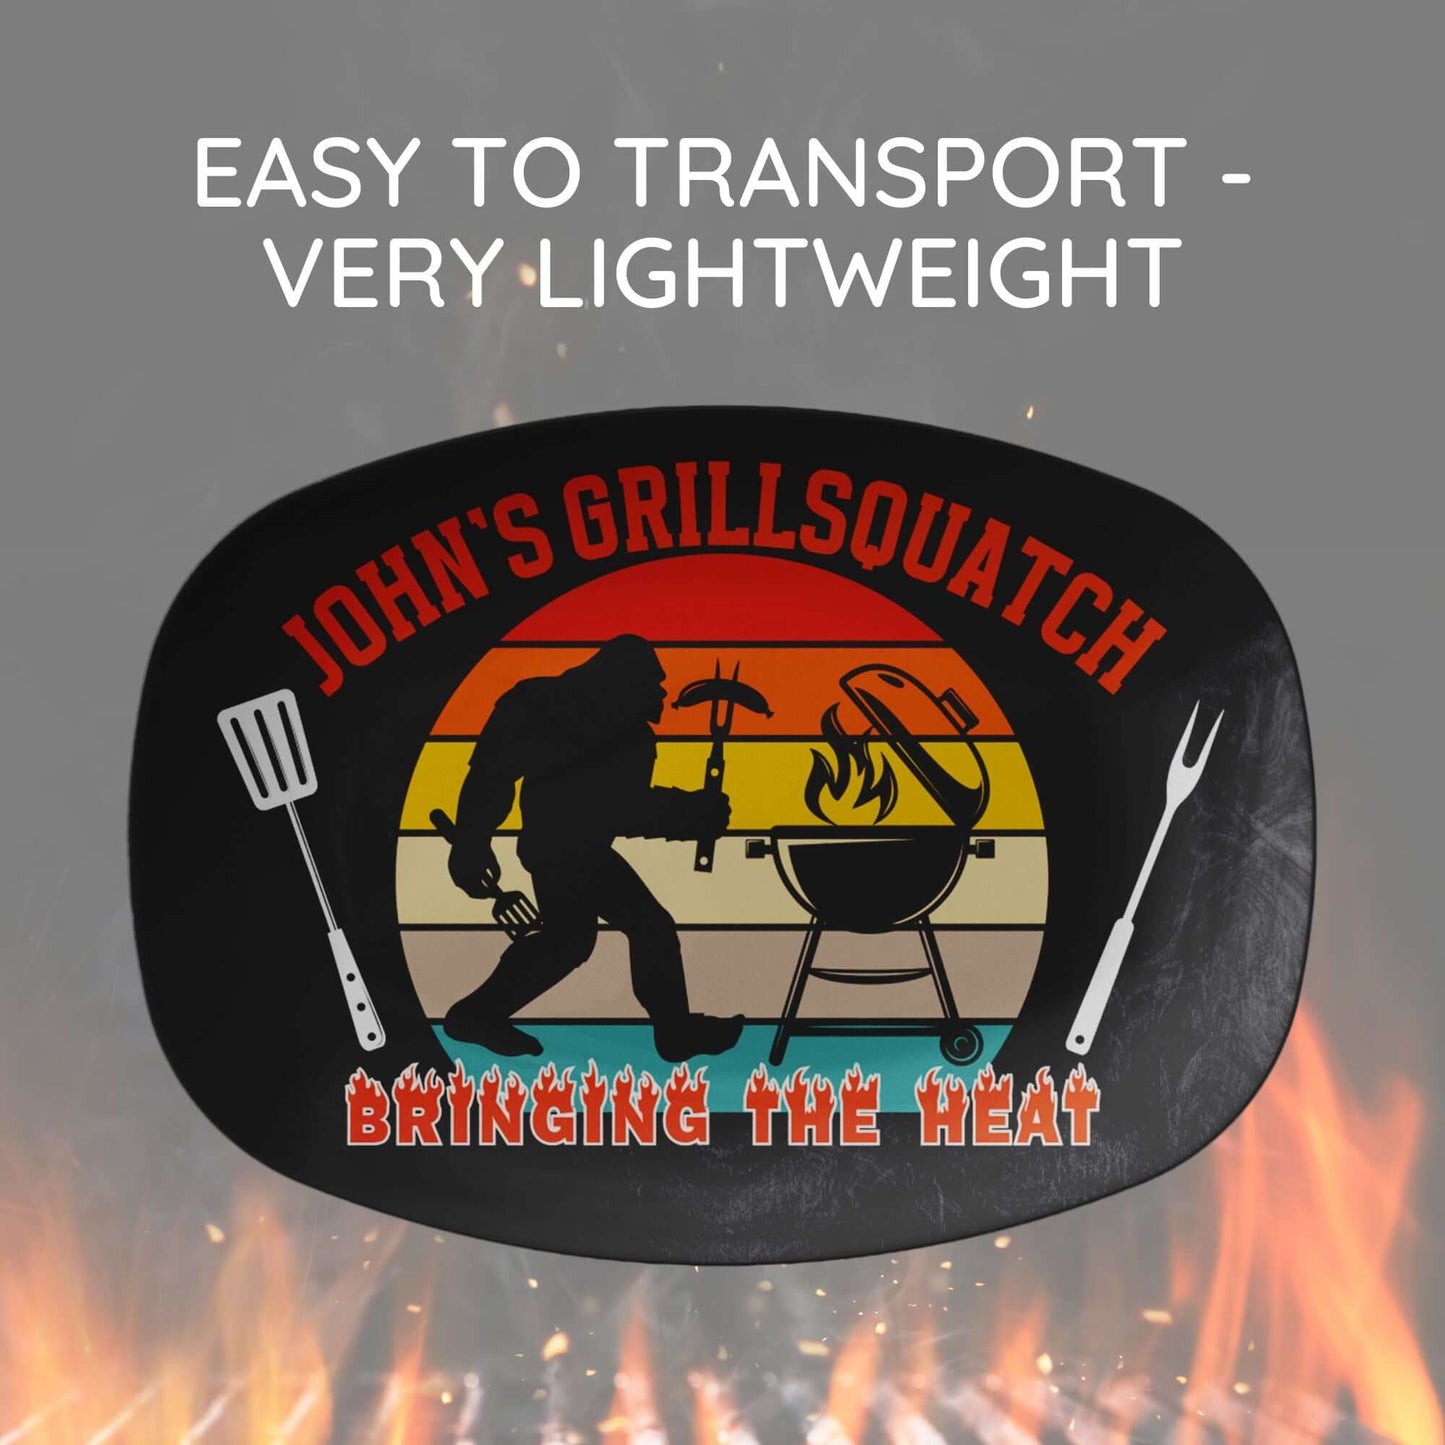 Personalized Grilling Plate Bigfoot Gift, Custom Grill Platter